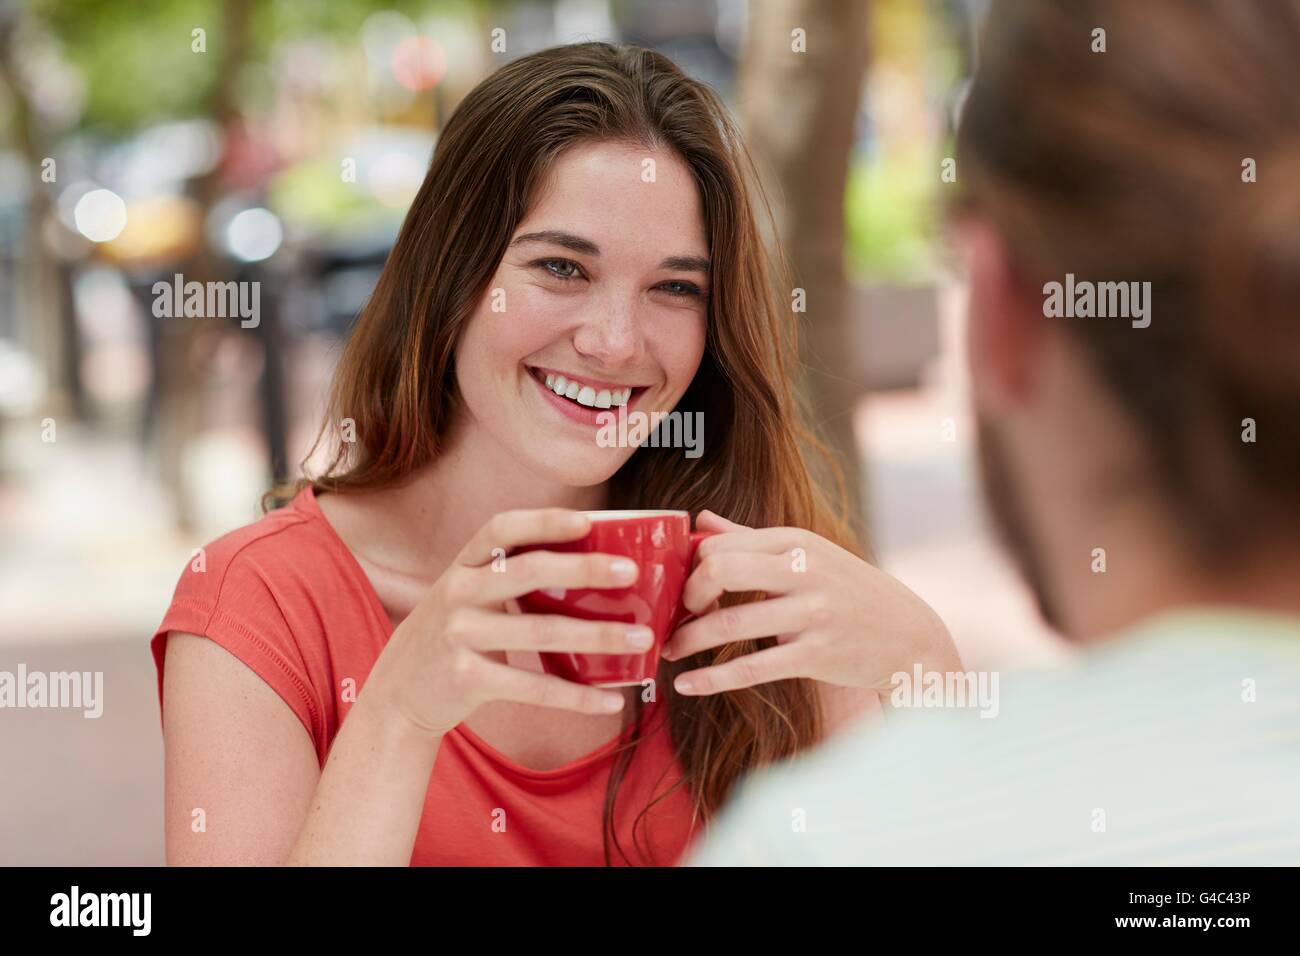 MODEL RELEASED. Young woman drinking coffee with friend. Stock Photo